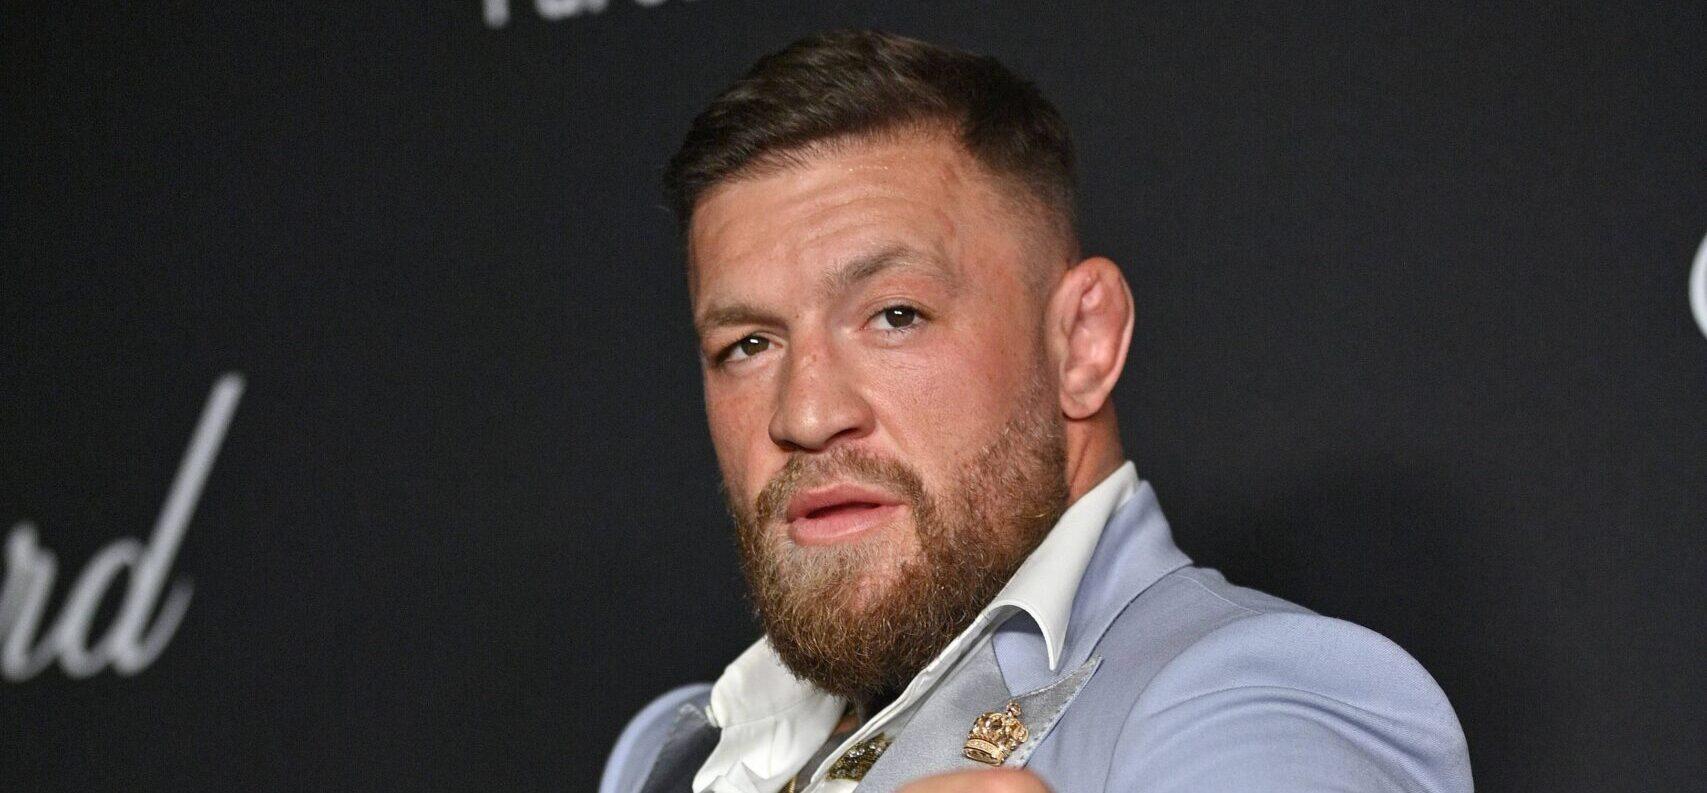 Conor McGregor Takes Next Step In Returning To UFC, Dana White Confirms